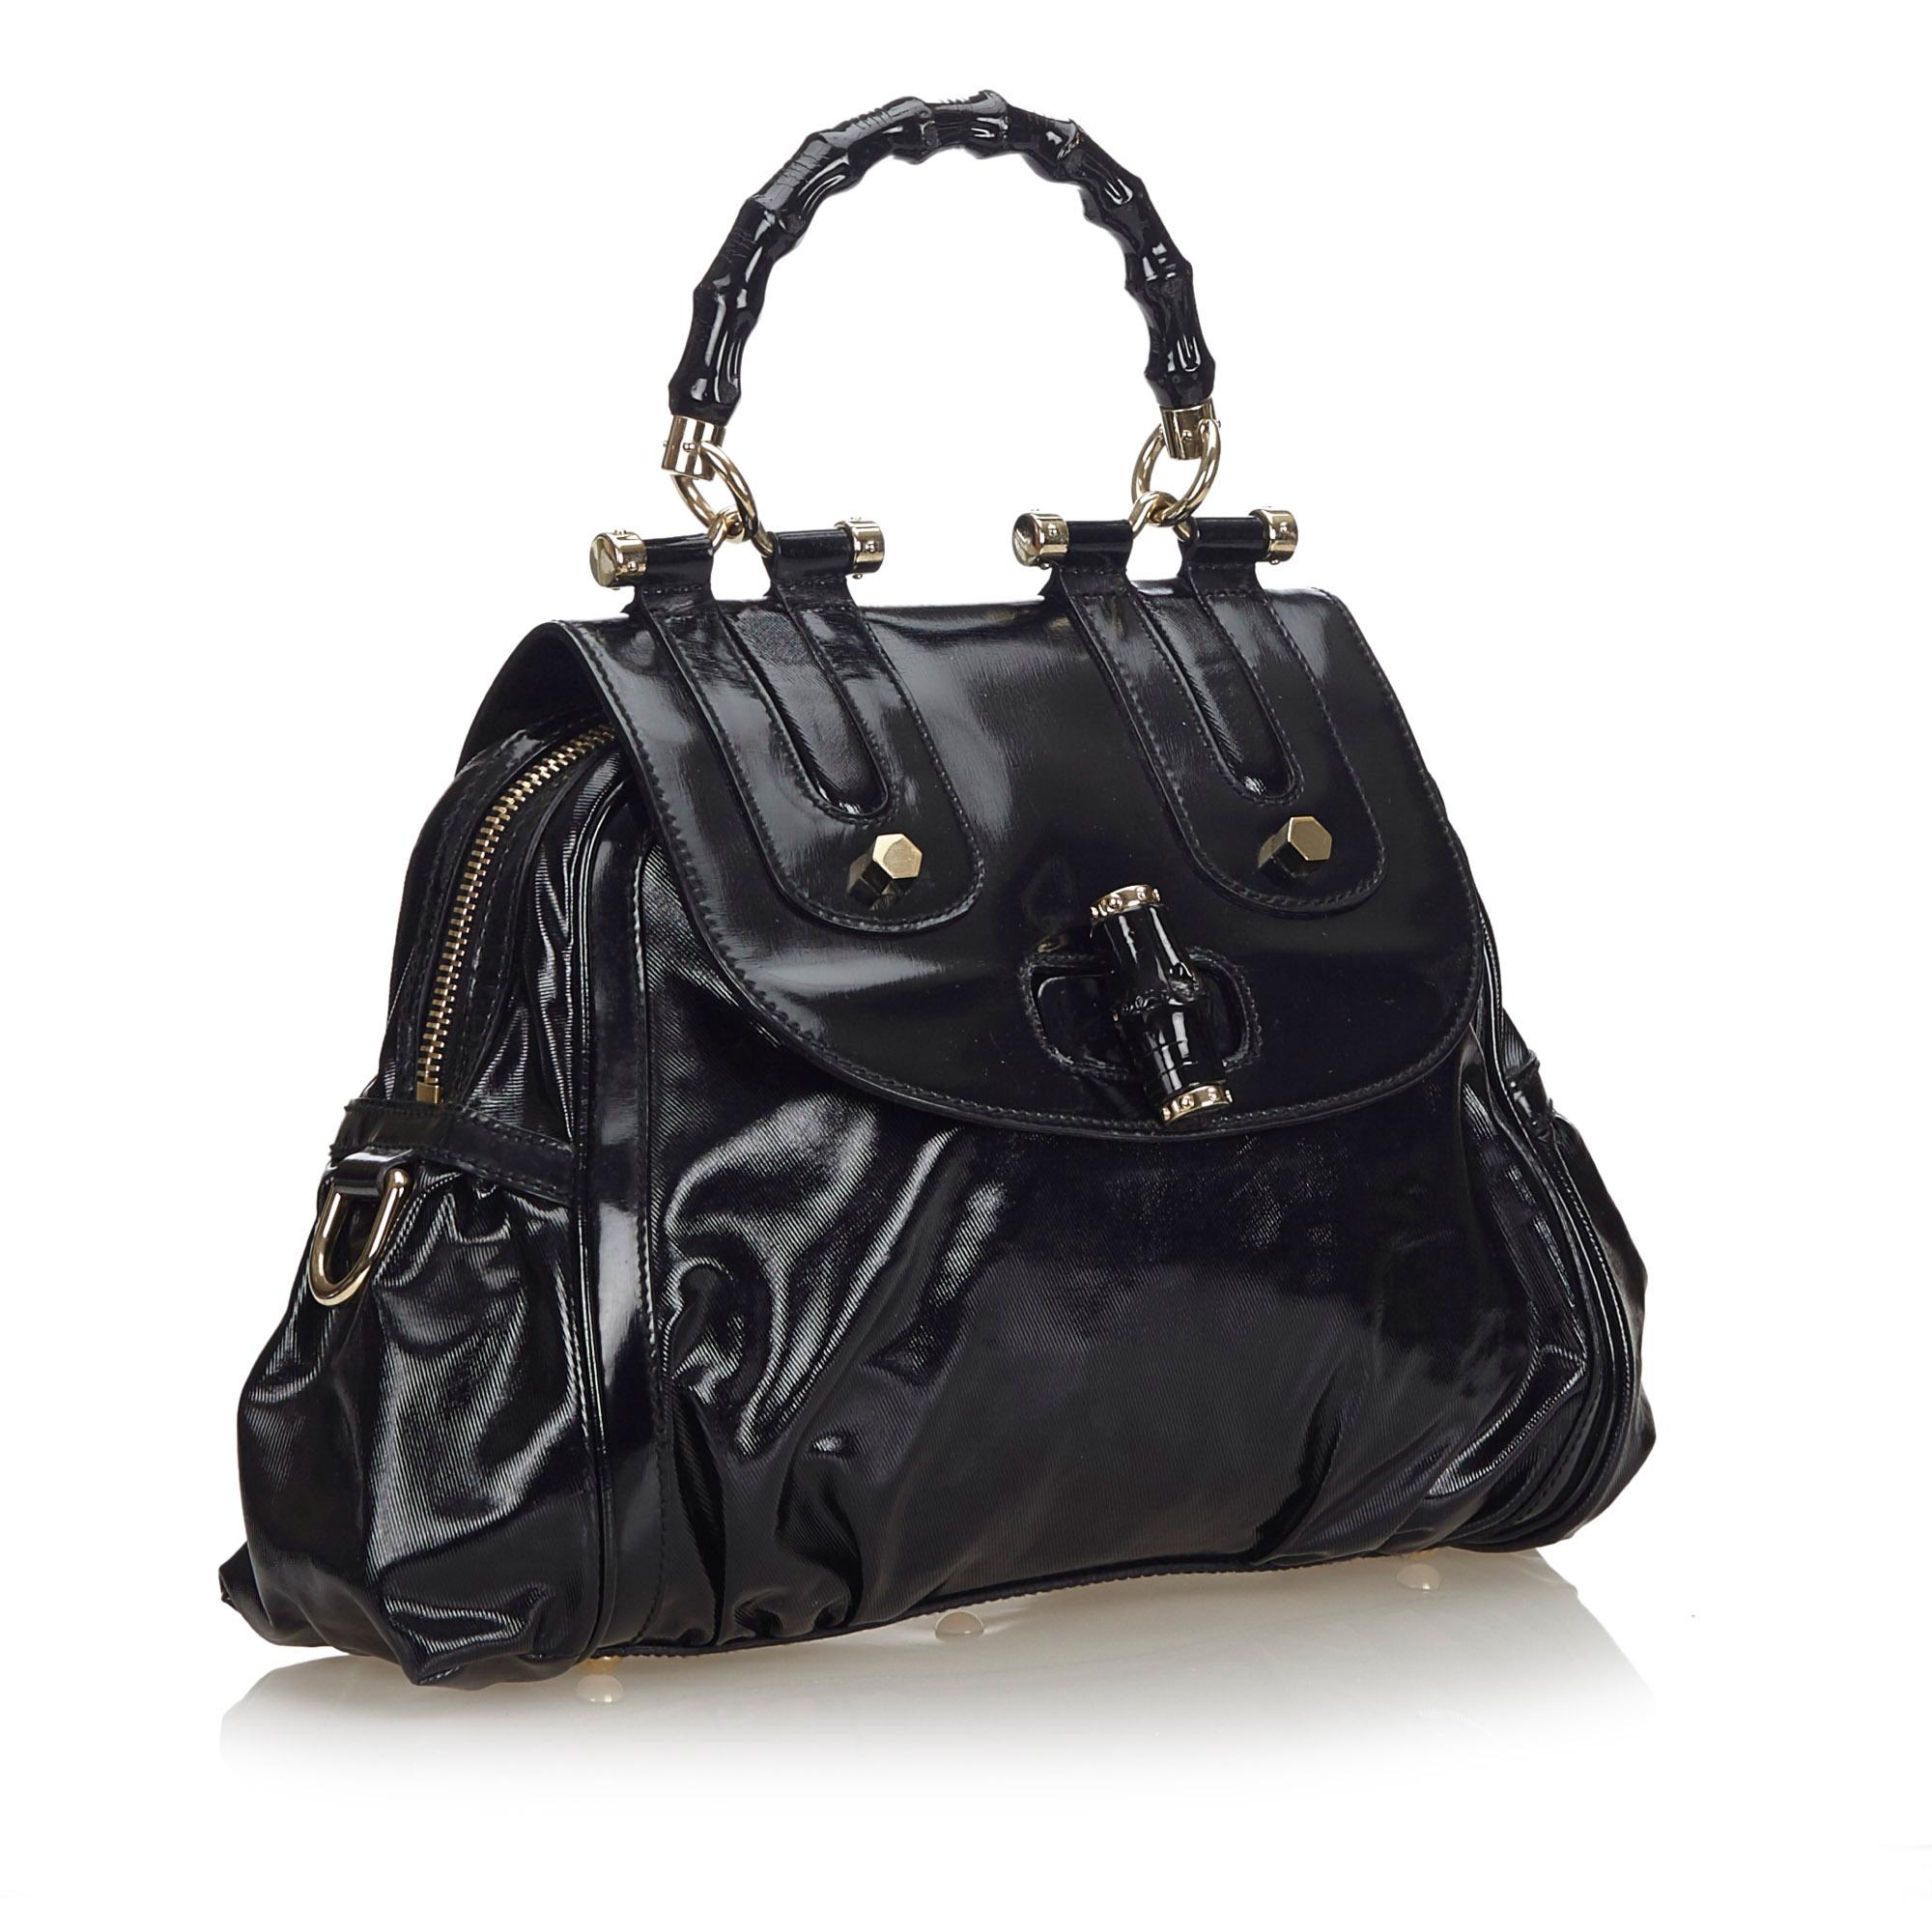 This satchel features a patent leather body, a bamboo top handle, a detachable flat leather strap, a front flap with a bamboo twist lock closure, a top zip closure, and interior zip and slip pockets. It carries as AB condition rating.

Inclusions: